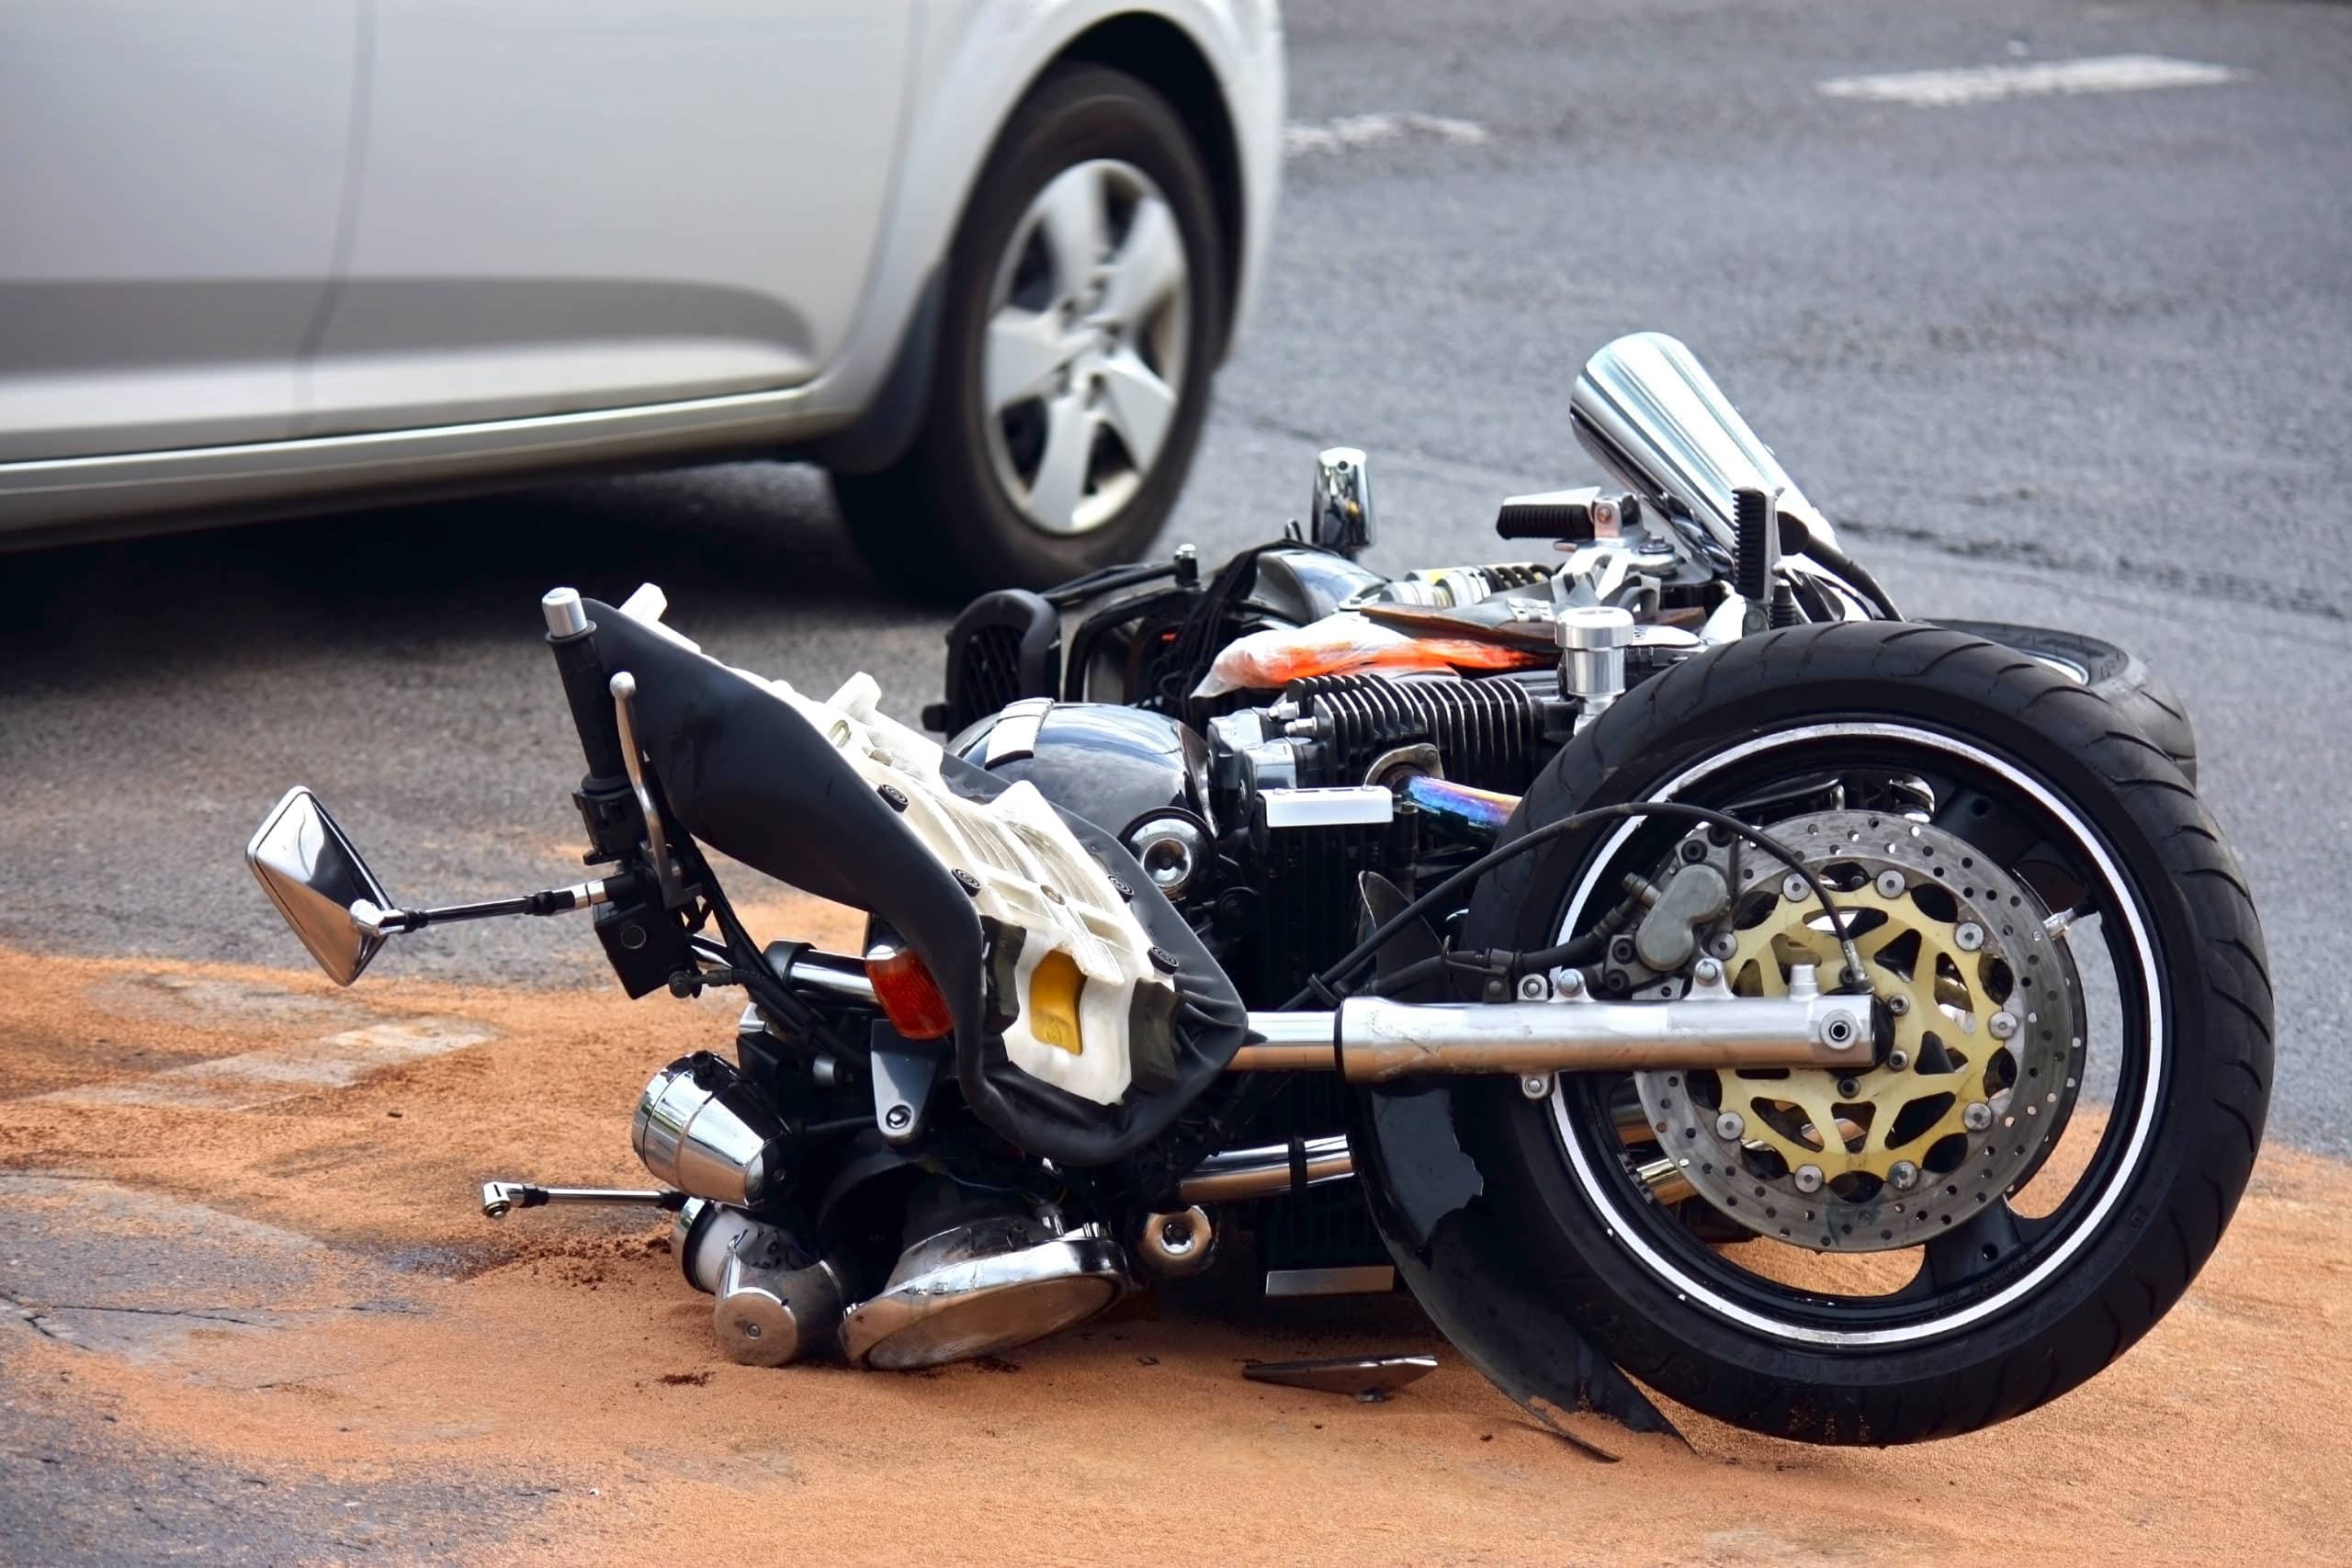 Under Texas laws, motorcyclists not wearing a helmet may still recover damages for accident injuries, but the amount may not be what you expect.